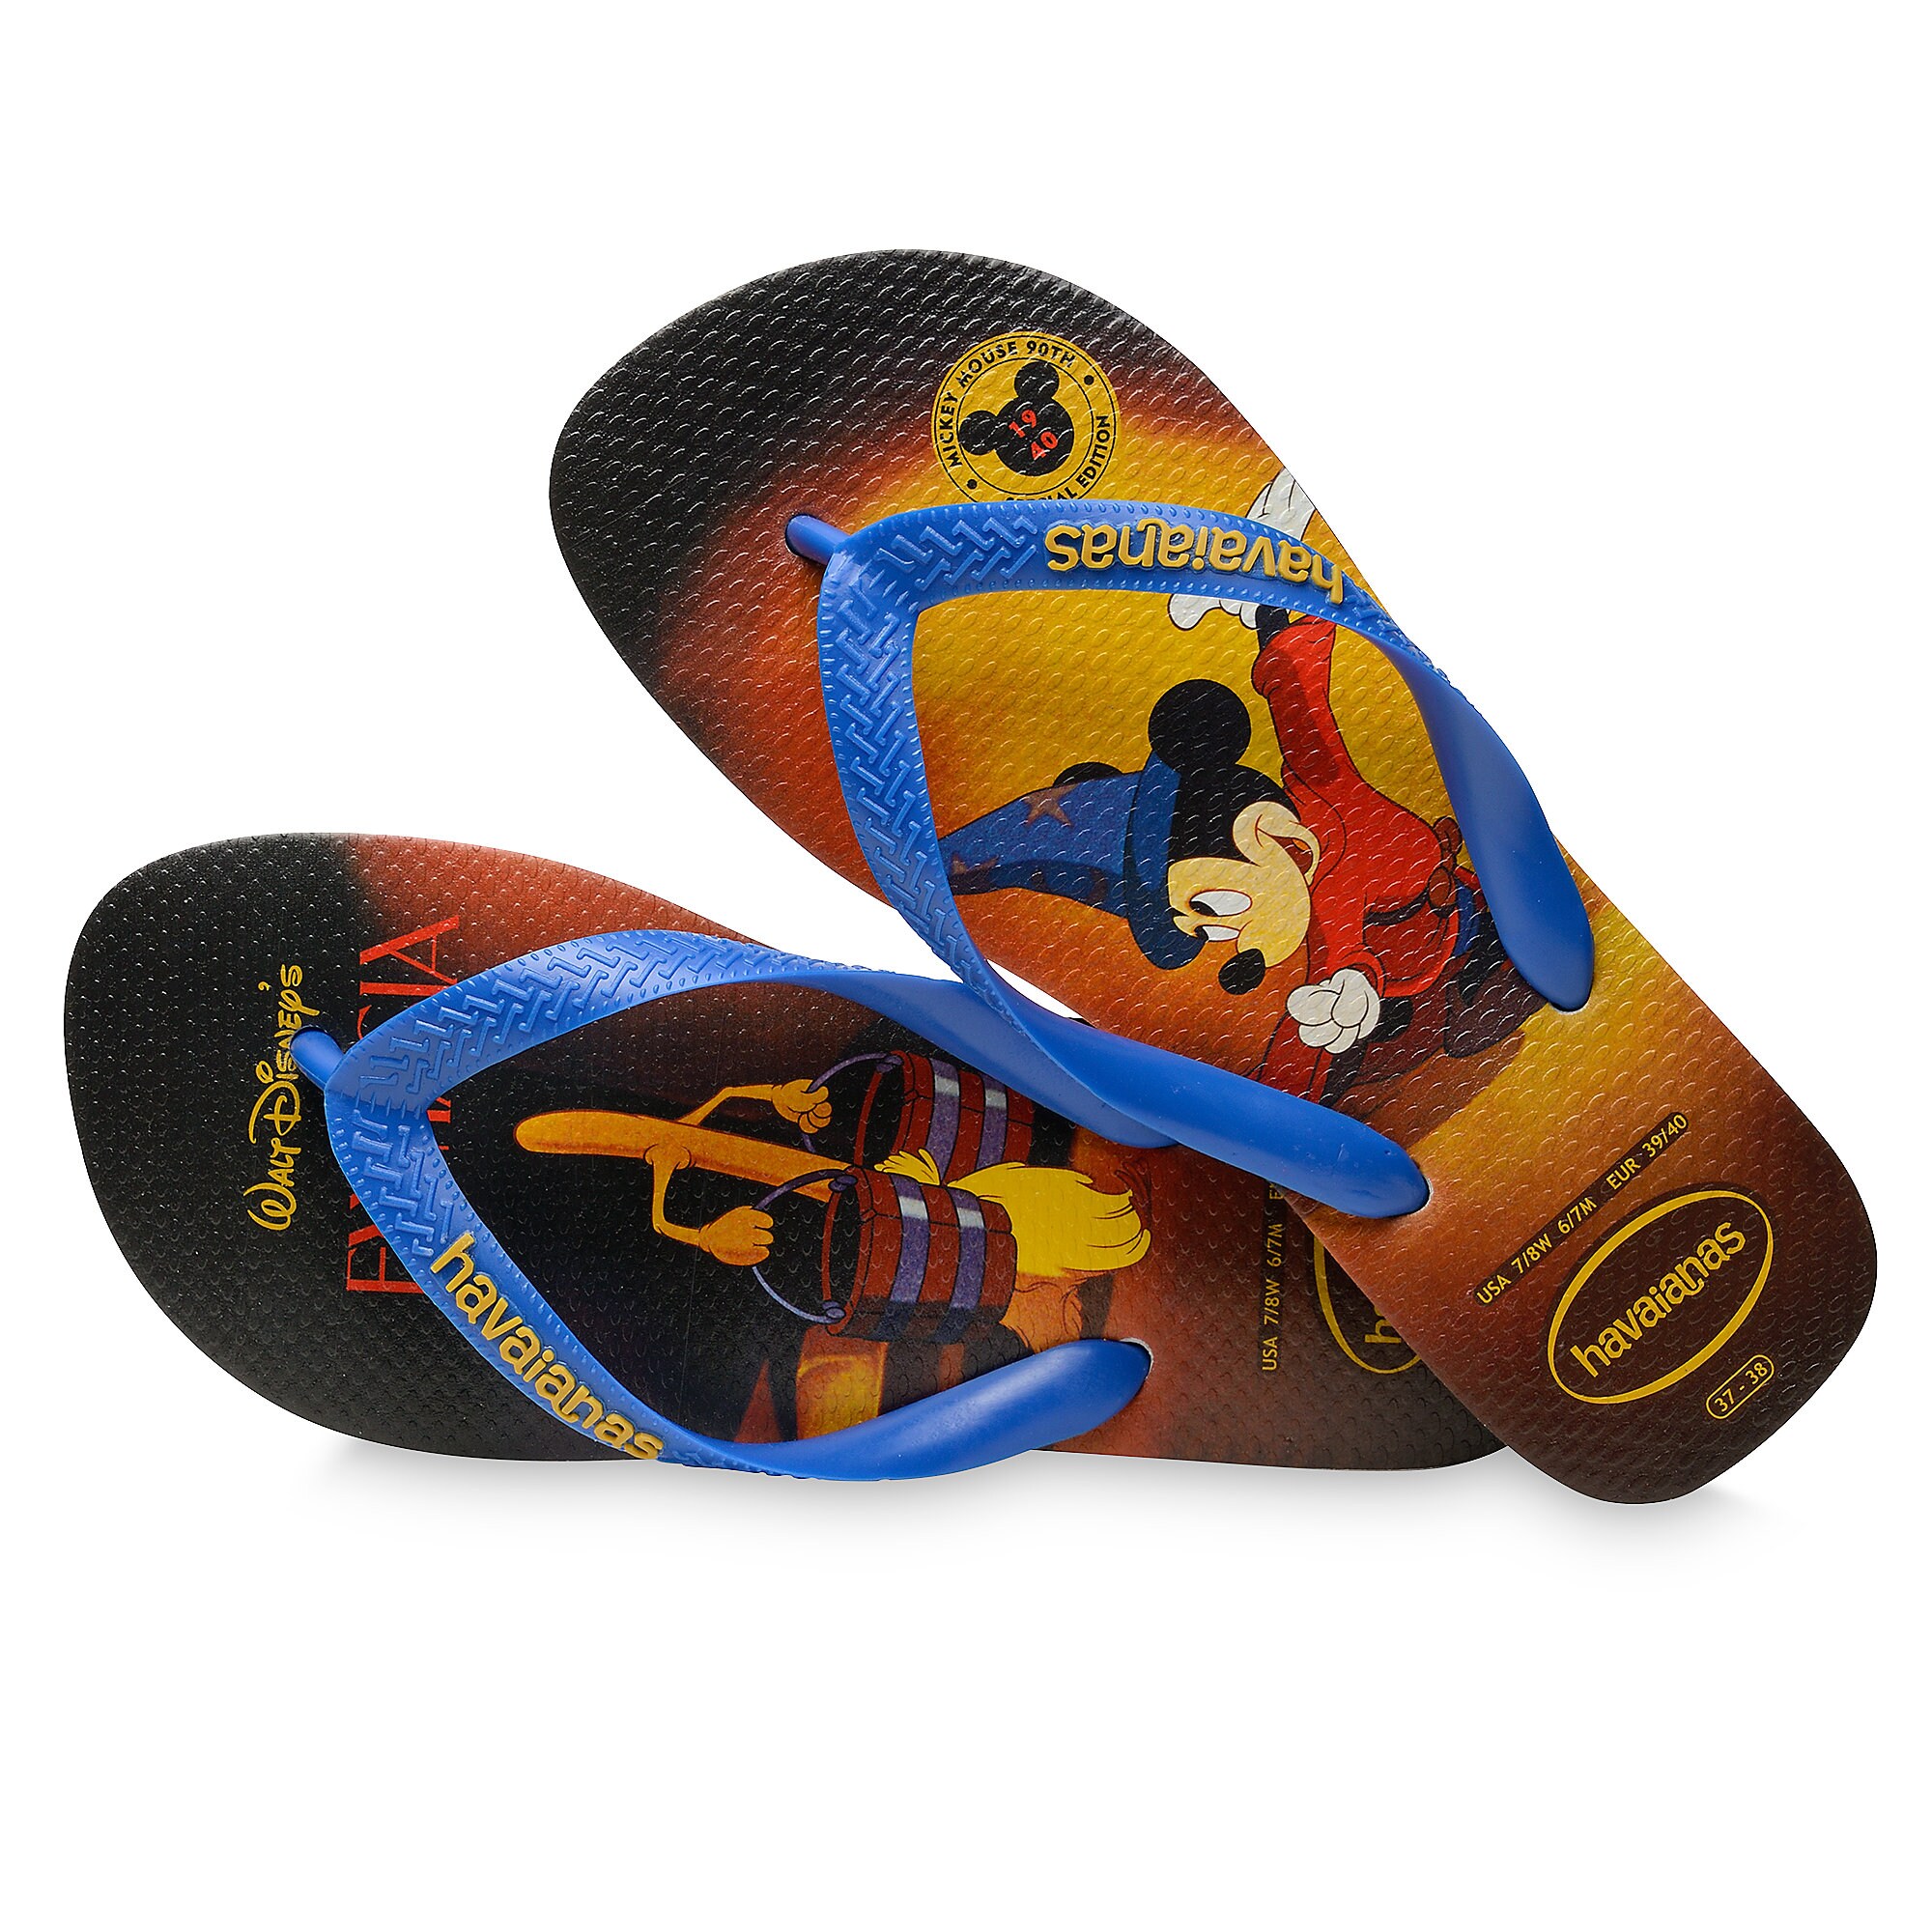 Sorcerer Mickey Mouse Flip Flops for Adults by Havaianas - 1940s